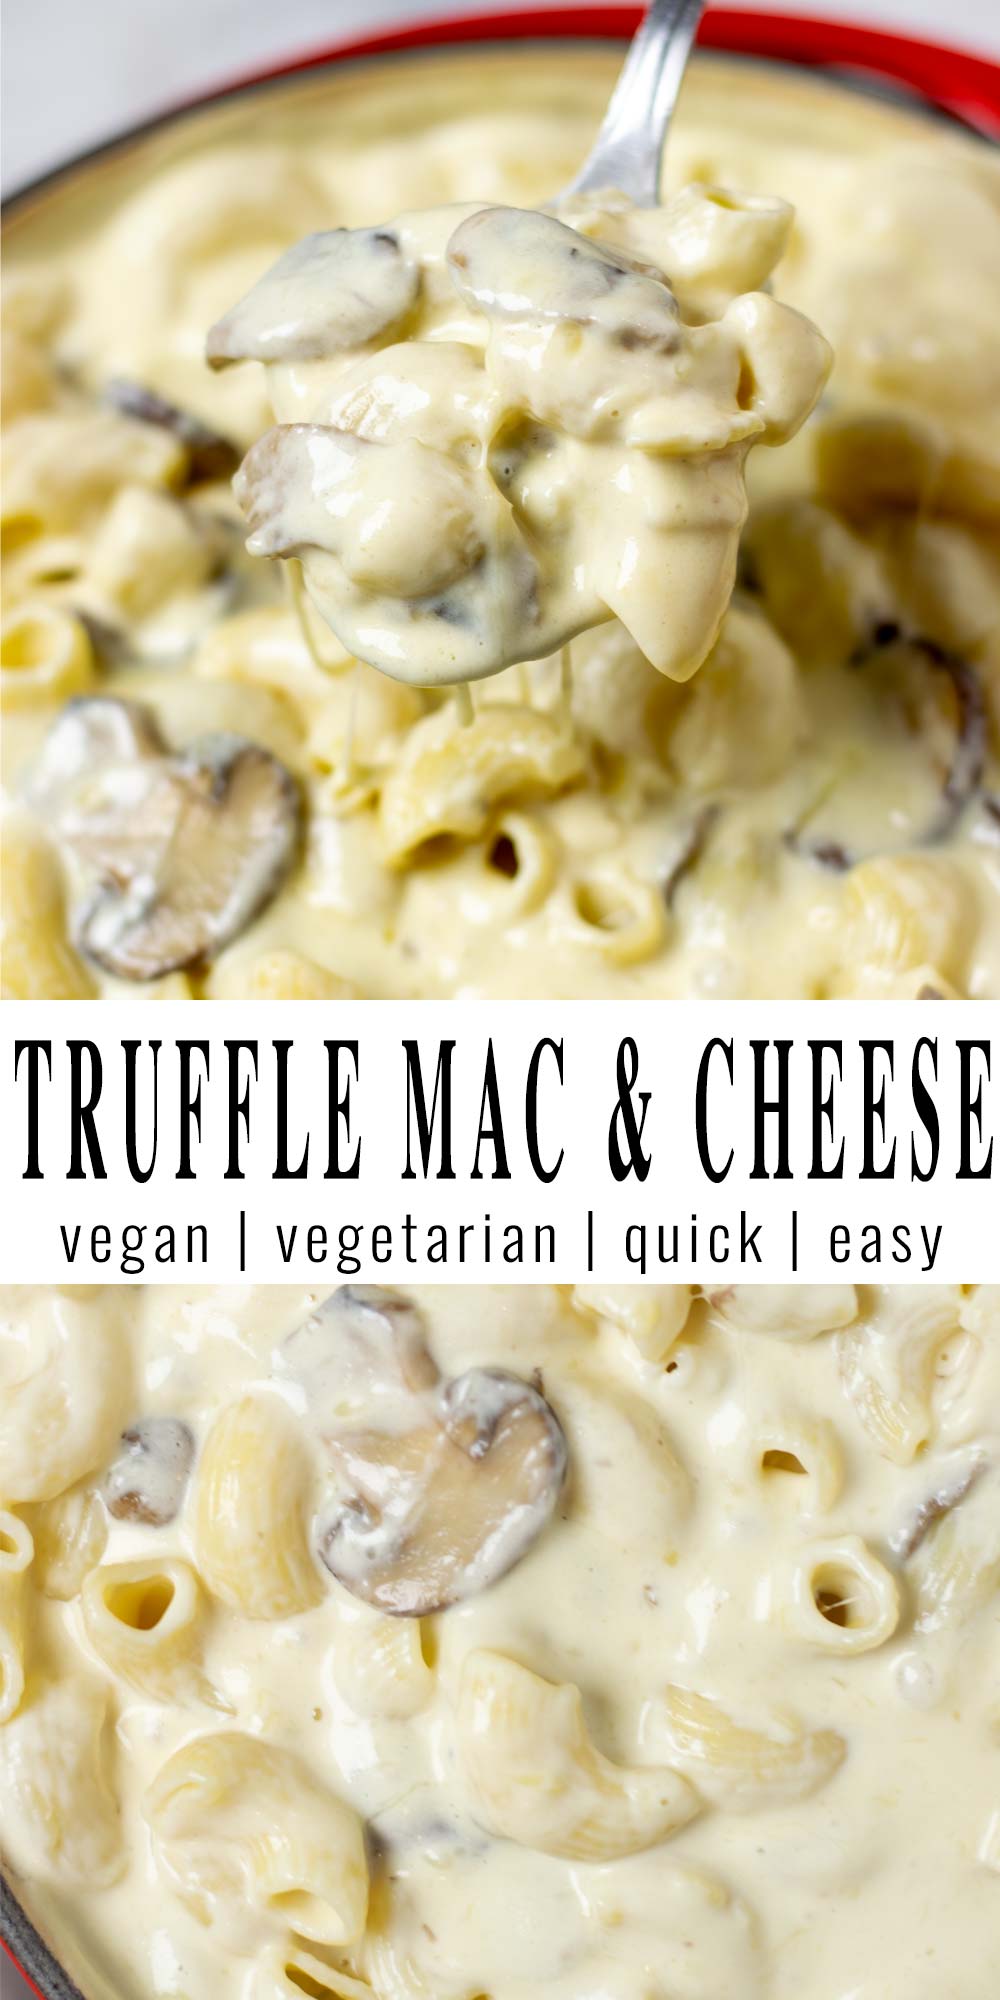 Collage of two pictures of the Truffle Mac and Cheese with recipe title text.